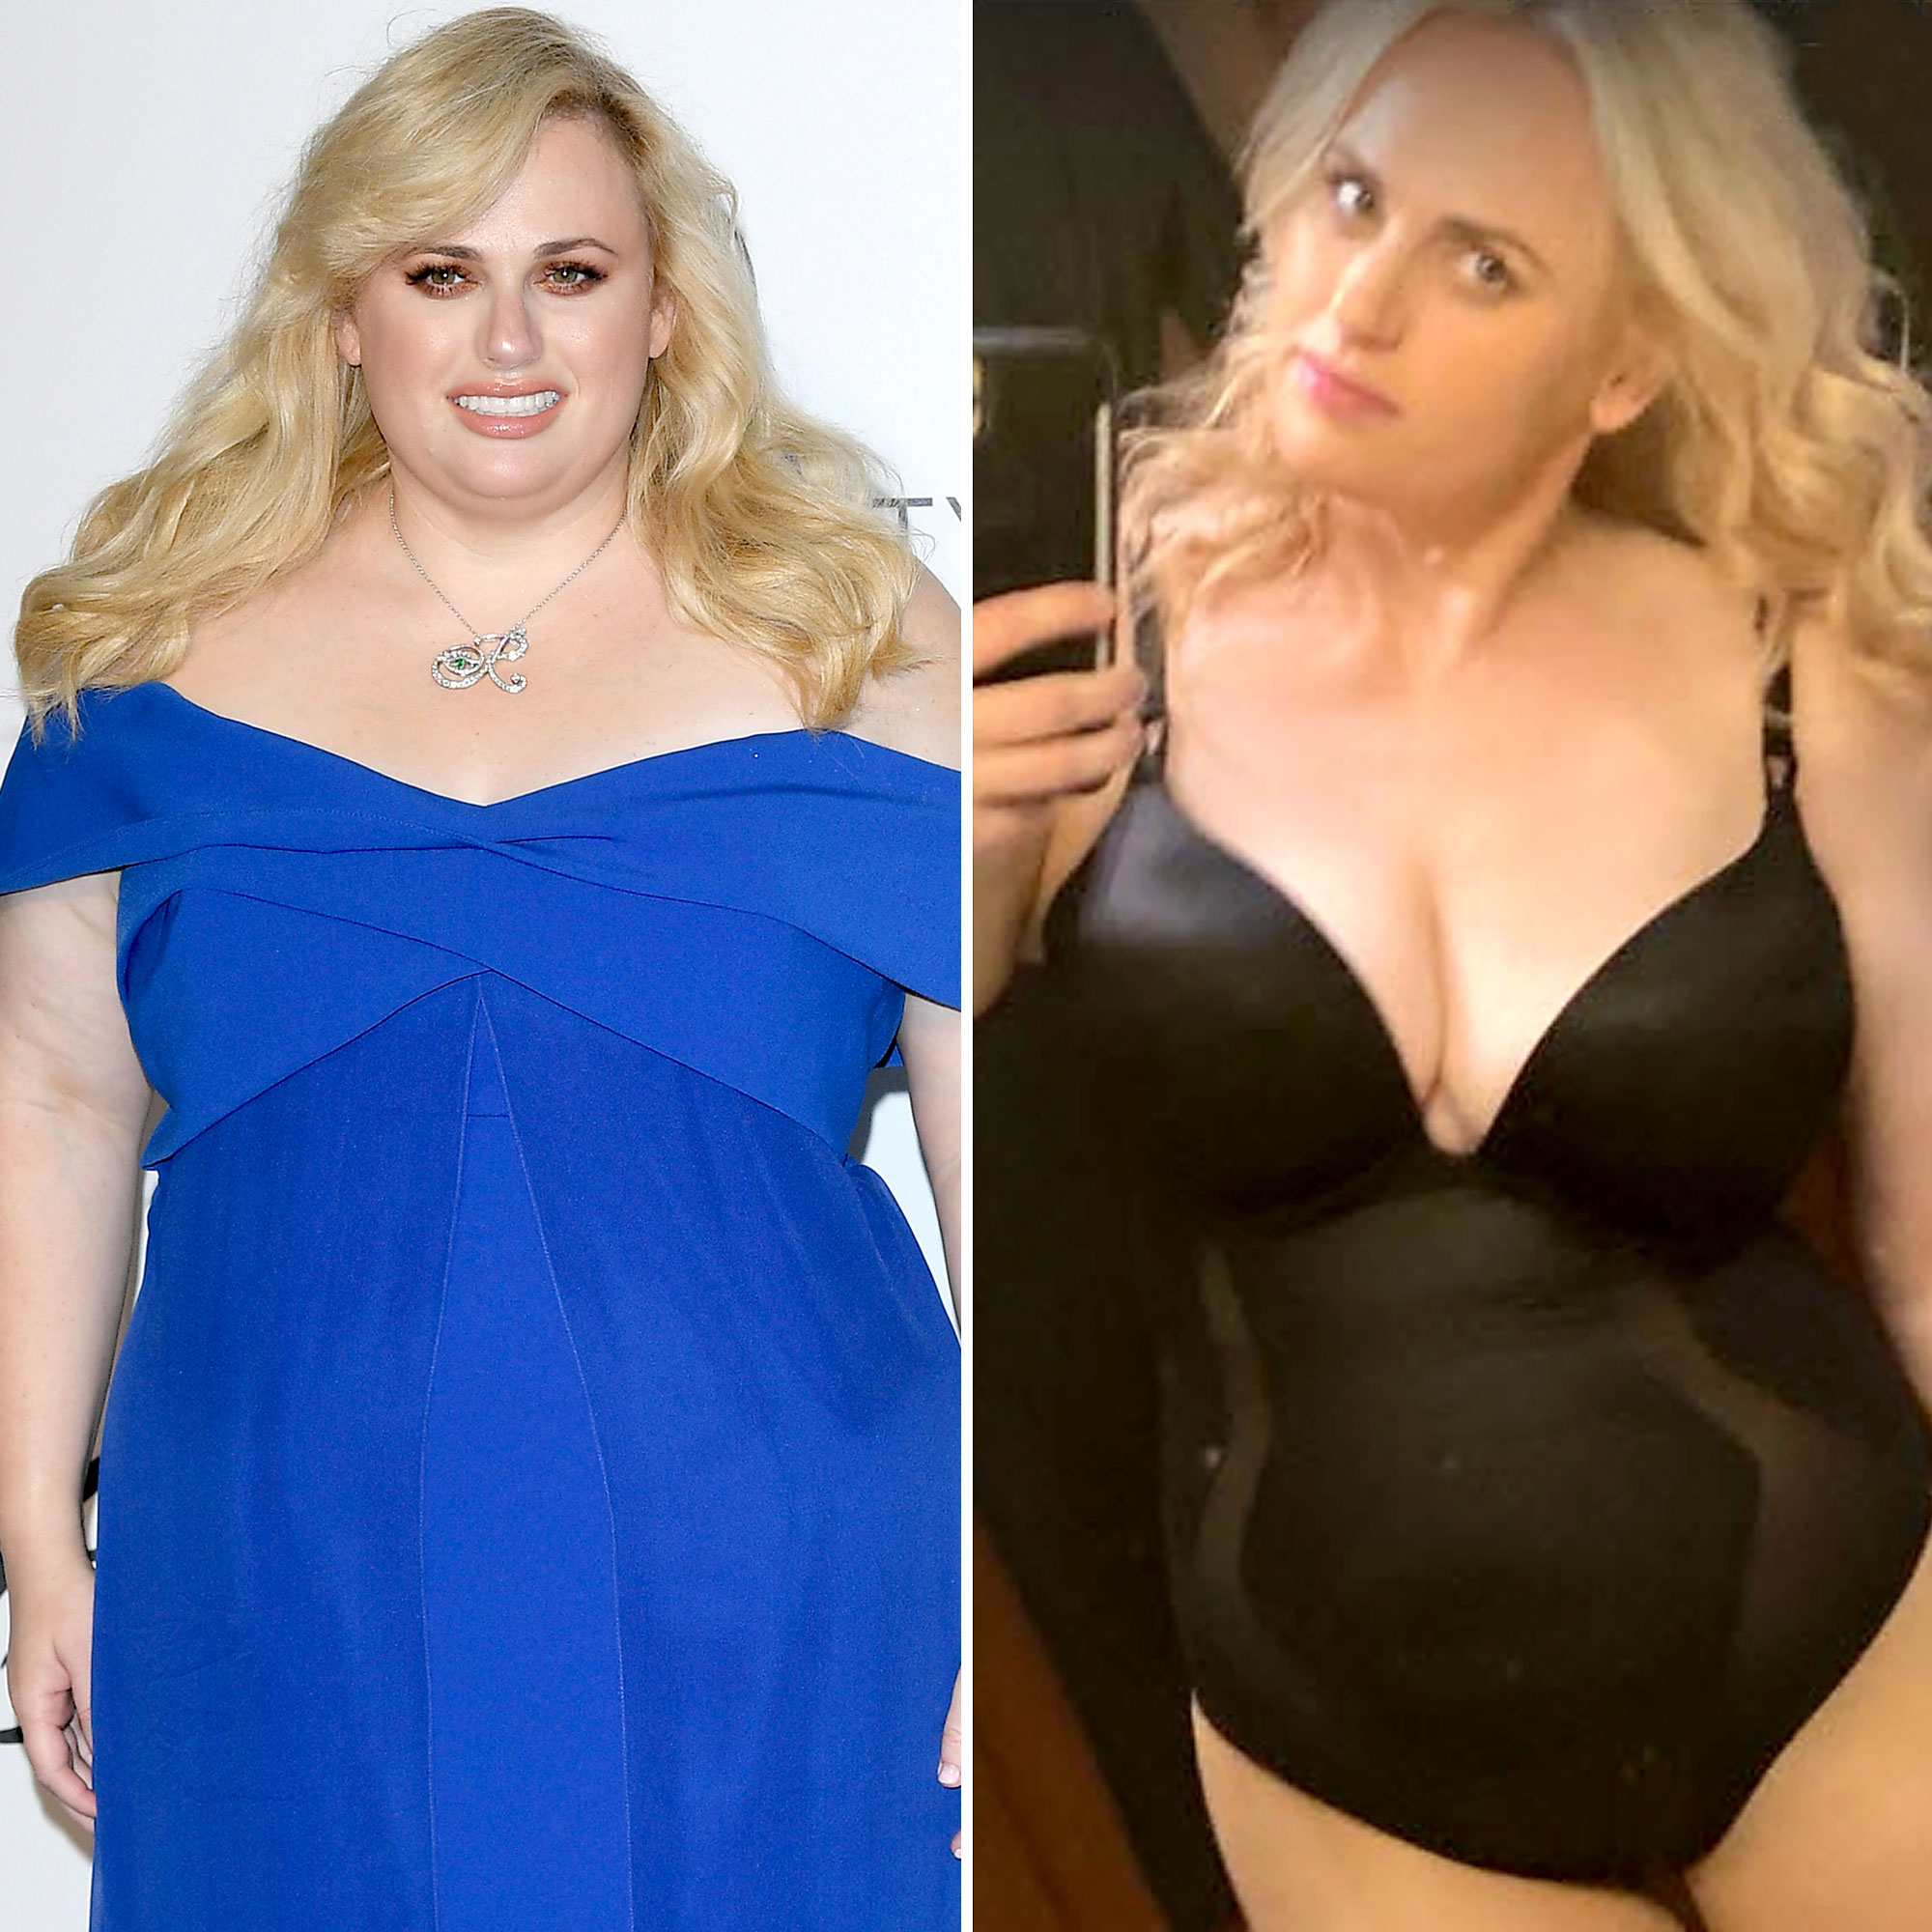 https://www.usmagazine.com/wp-content/uploads/2021/04/Rebel-Wilson-Shows-Off-Her-Figure-Shapewear-Bodysuit-After-Recent-Weight-Loss-001.jpg?quality=80&strip=all